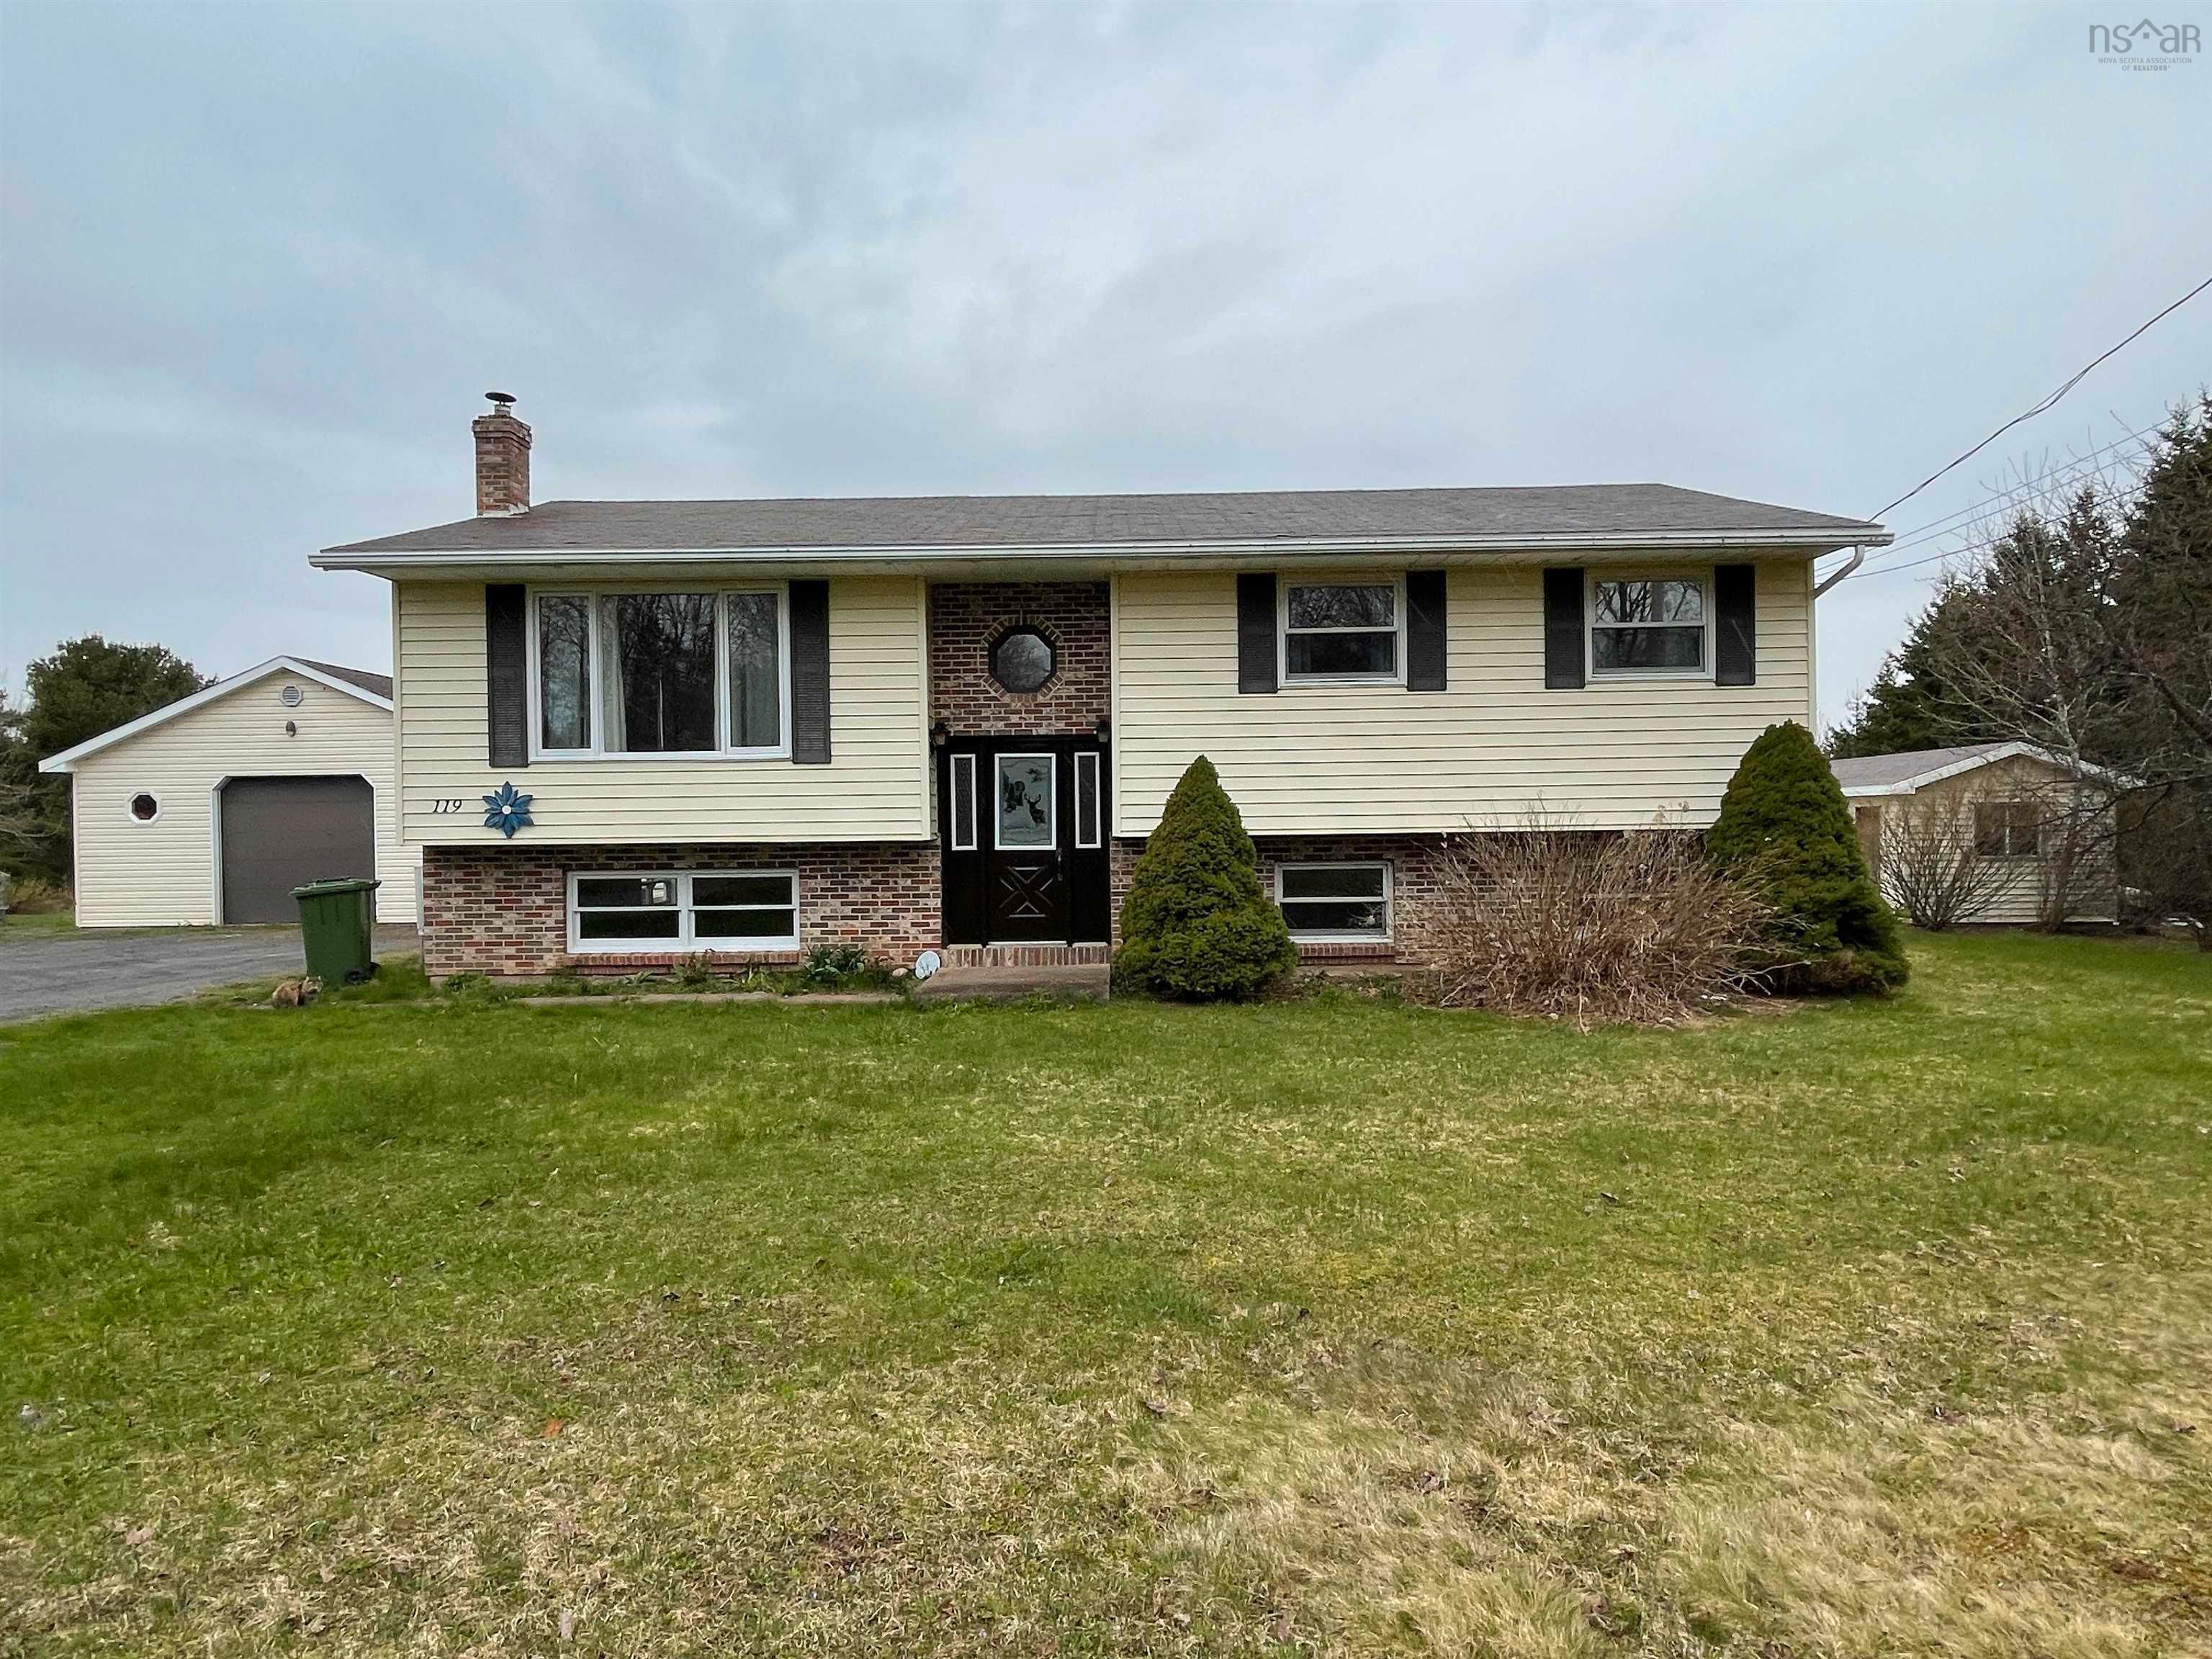 Main Photo: 119 Hamilton Road in Hamilton Road: 108-Rural Pictou County Residential for sale (Northern Region)  : MLS®# 202209407